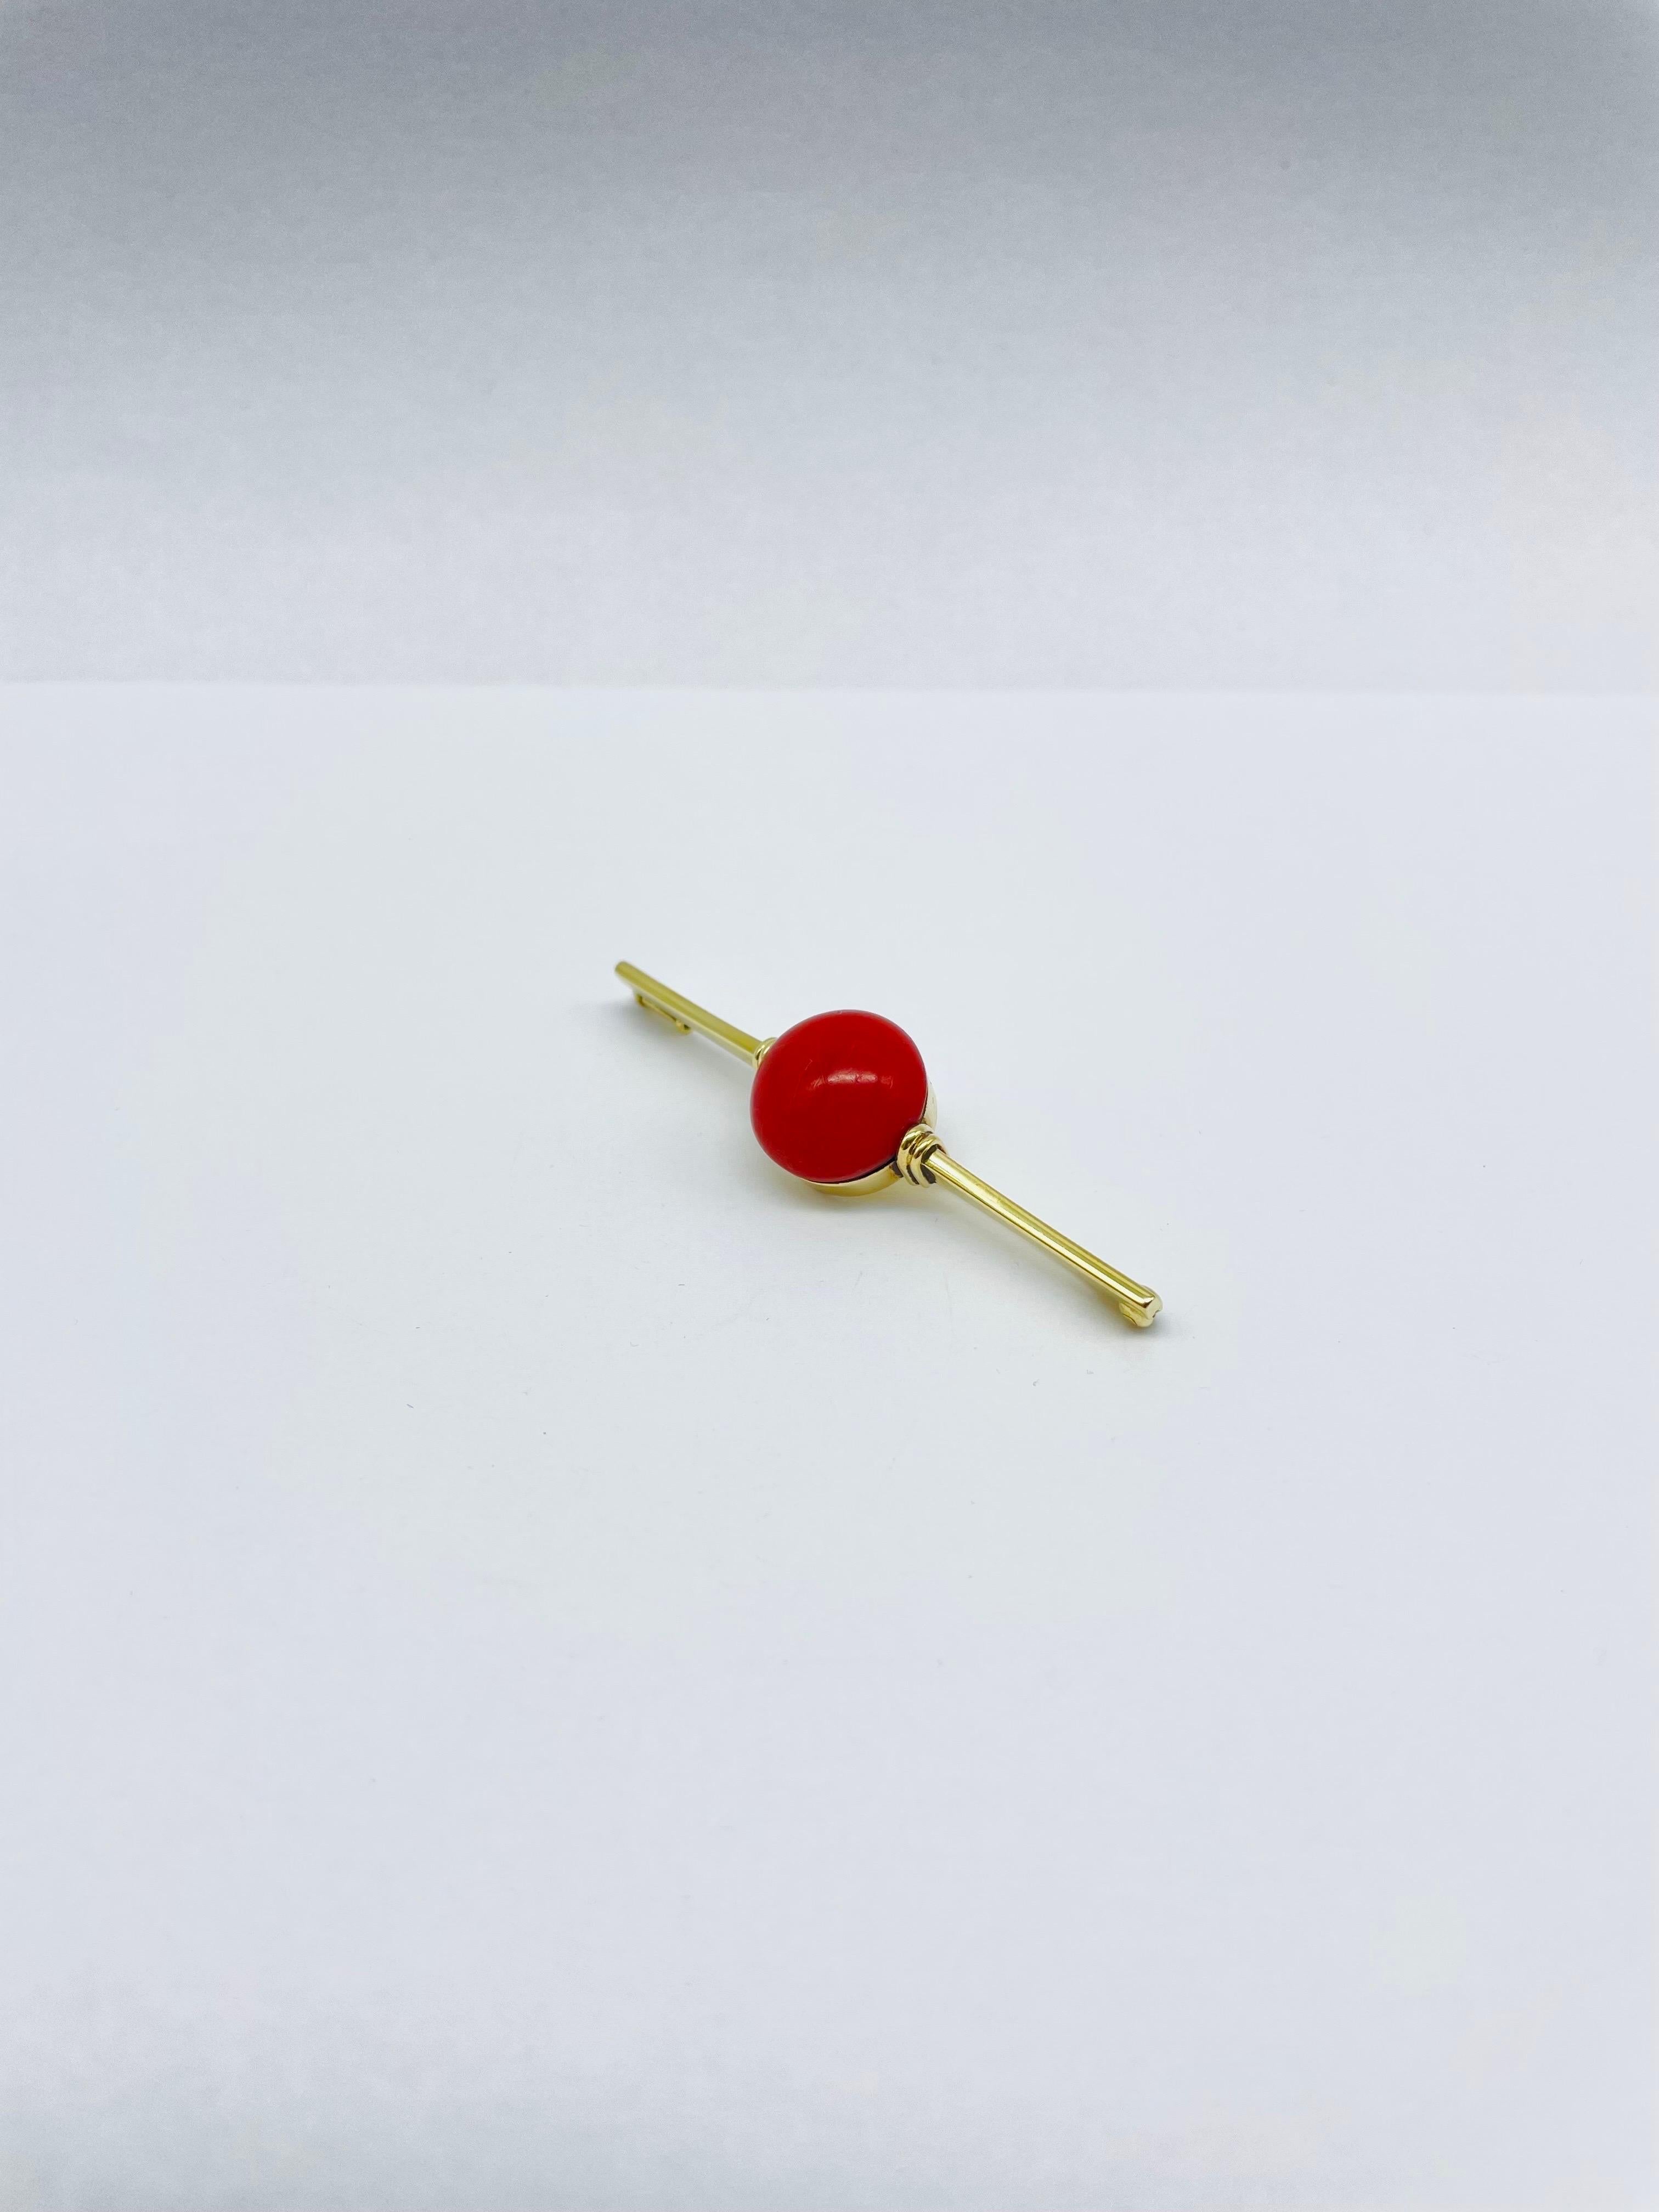 This brooch is a true statement piece, designed to elevate any outfit and capture the attention of those around you.

Crafted from solid 14k yellow gold, this bar brooch features a striking dark red coral at its center. The coral is expertly cut and